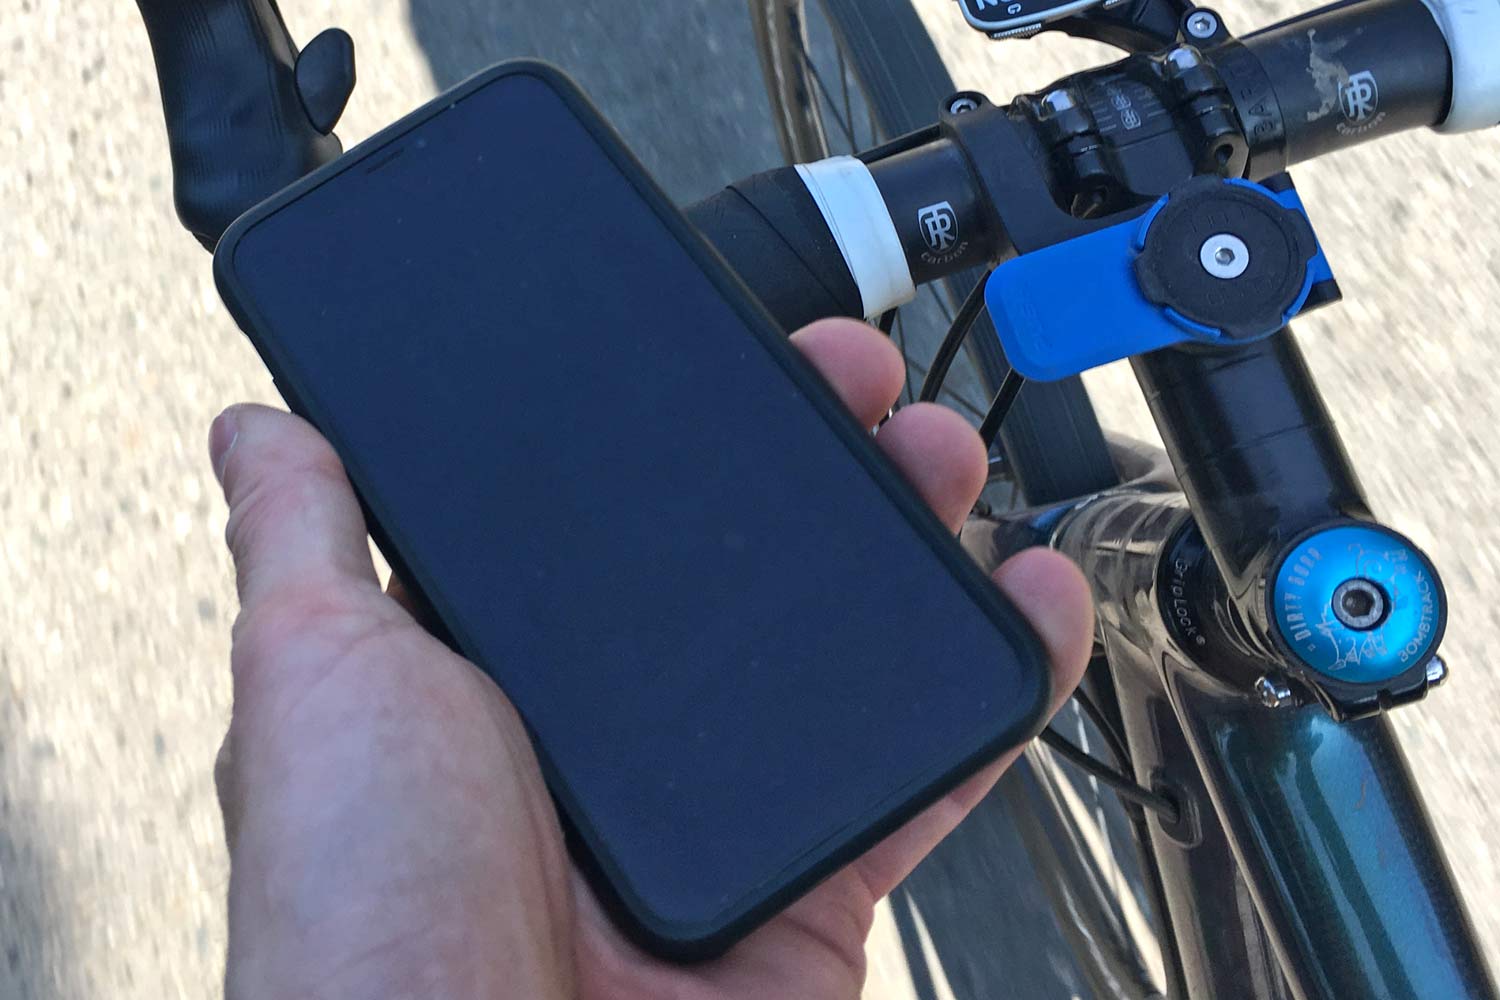 In-Depth Review of the Quad Lock iPhone Bike Mount Case